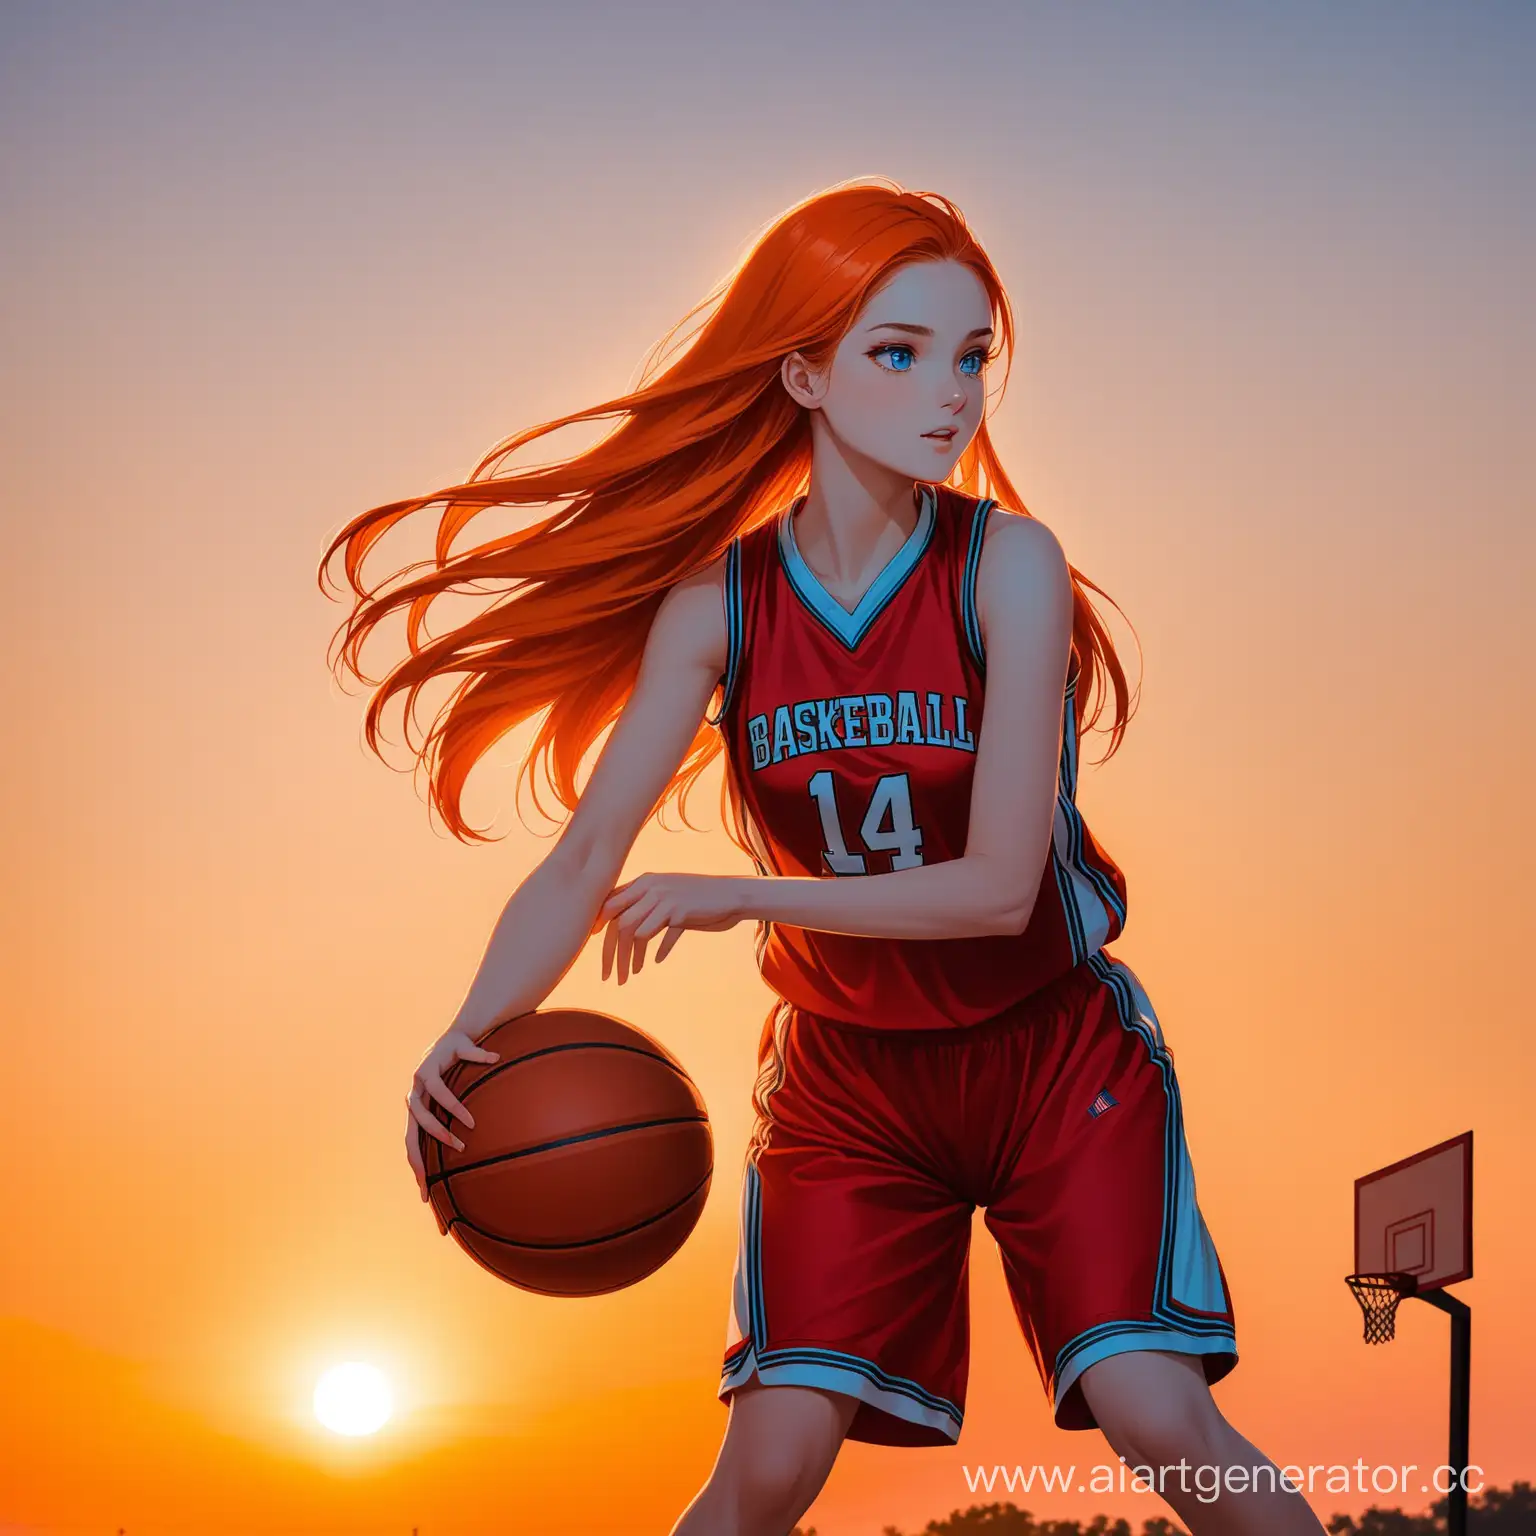 Dusk-Basketball-Game-with-Vibrant-OrangeHaired-Player